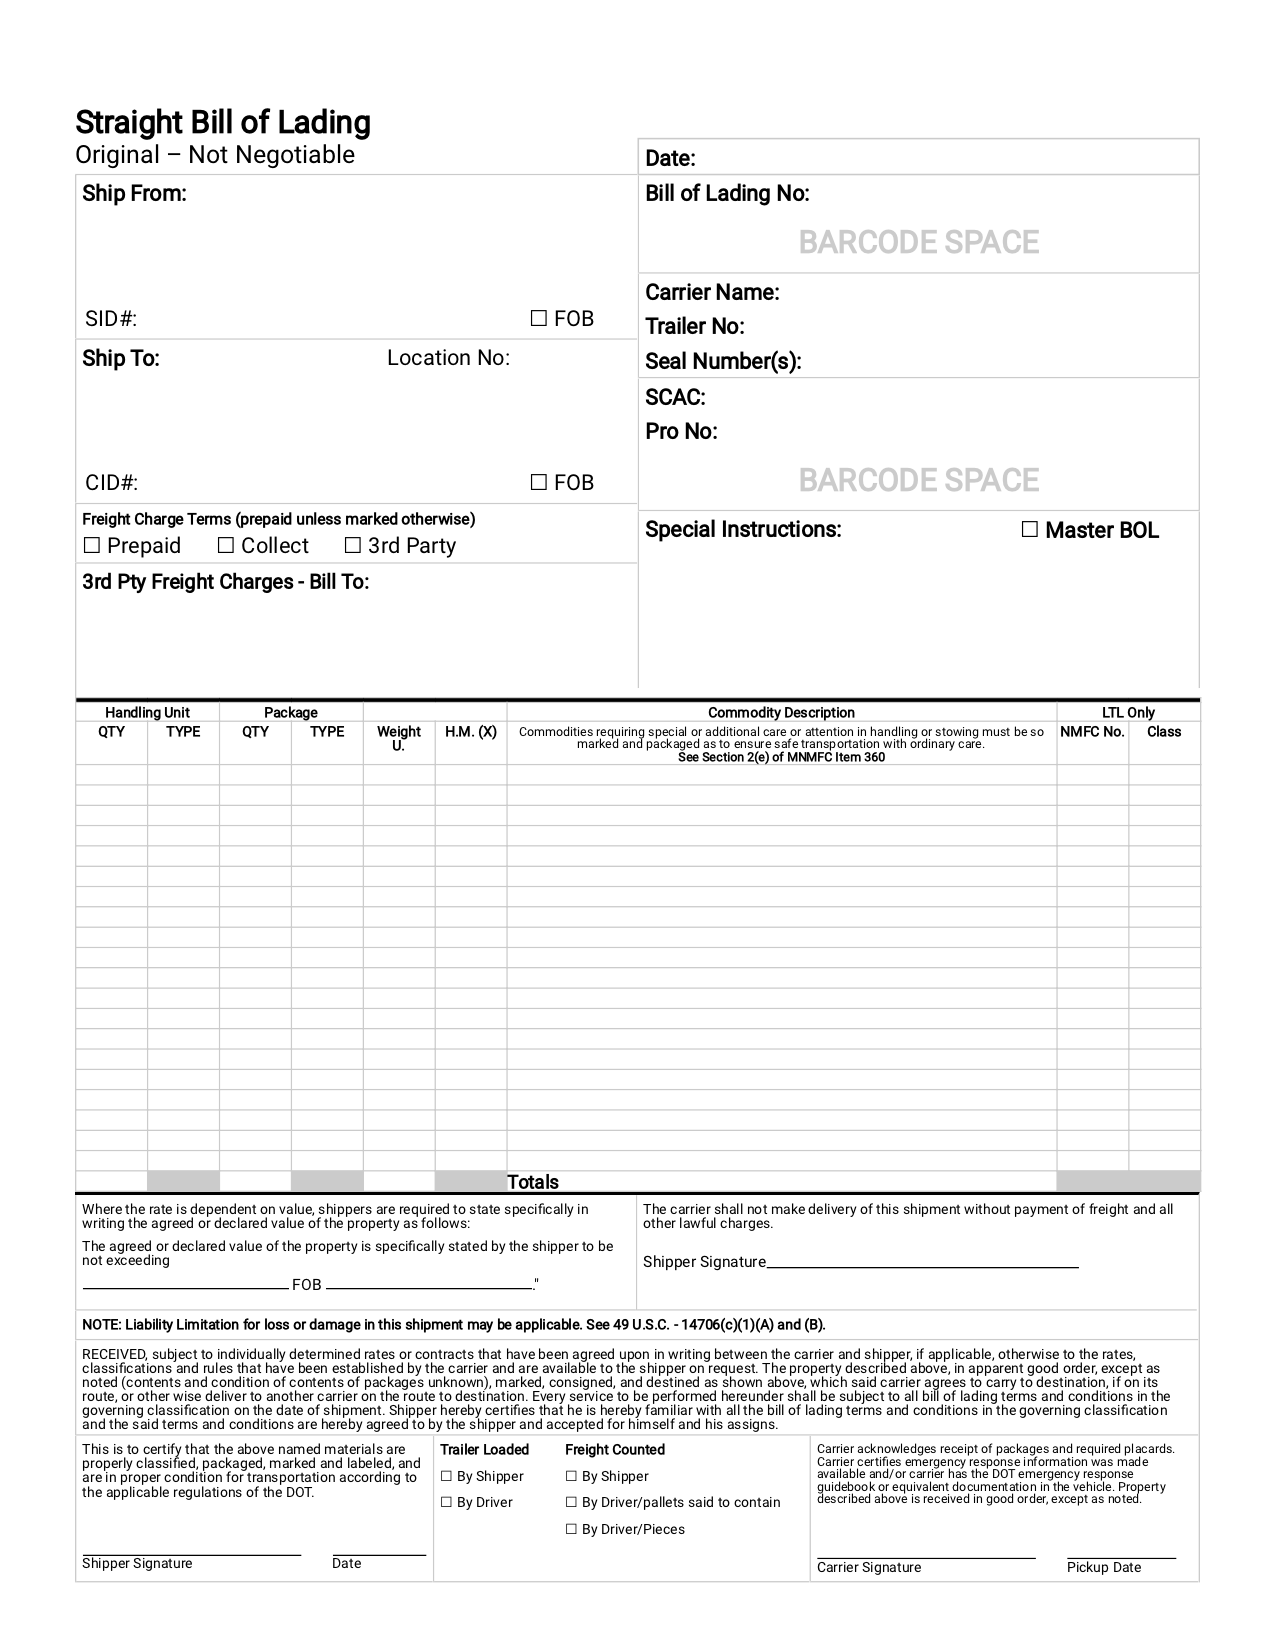 Straight Bill of Lading Printable Template